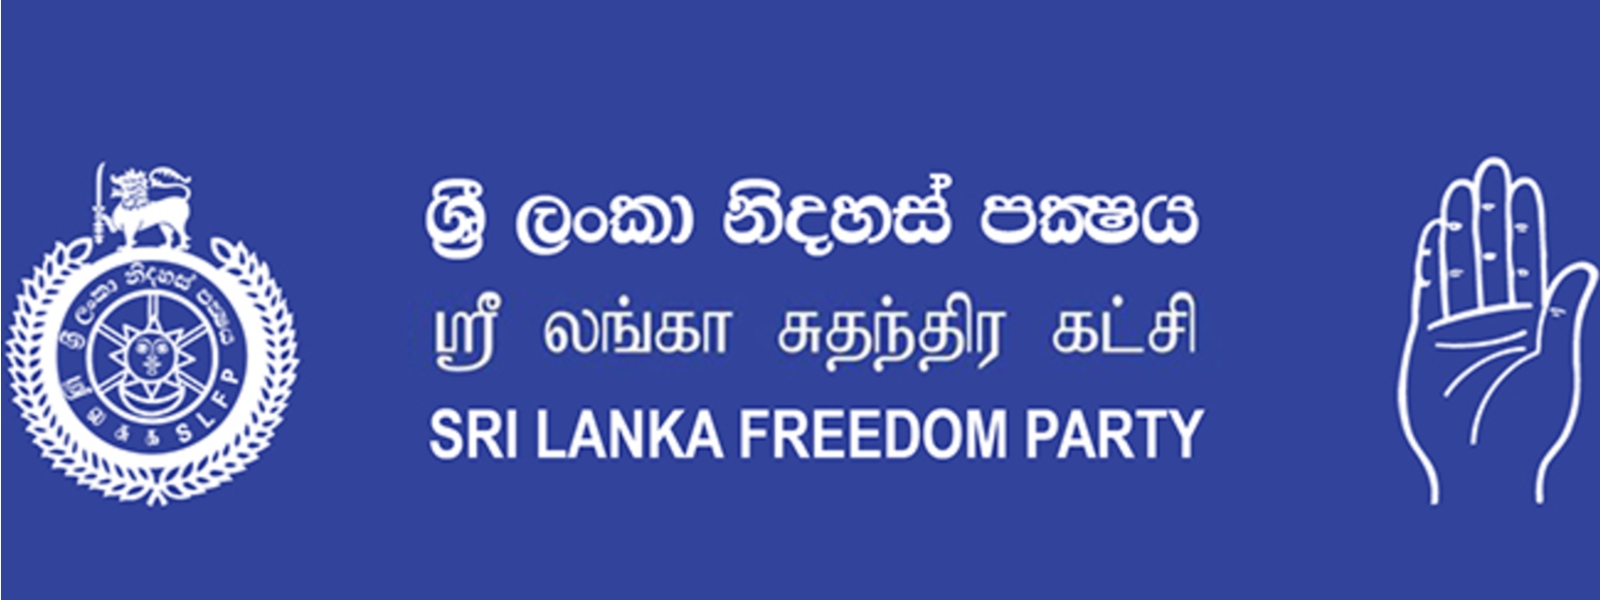 SLFP to submit a request letter to President on crises